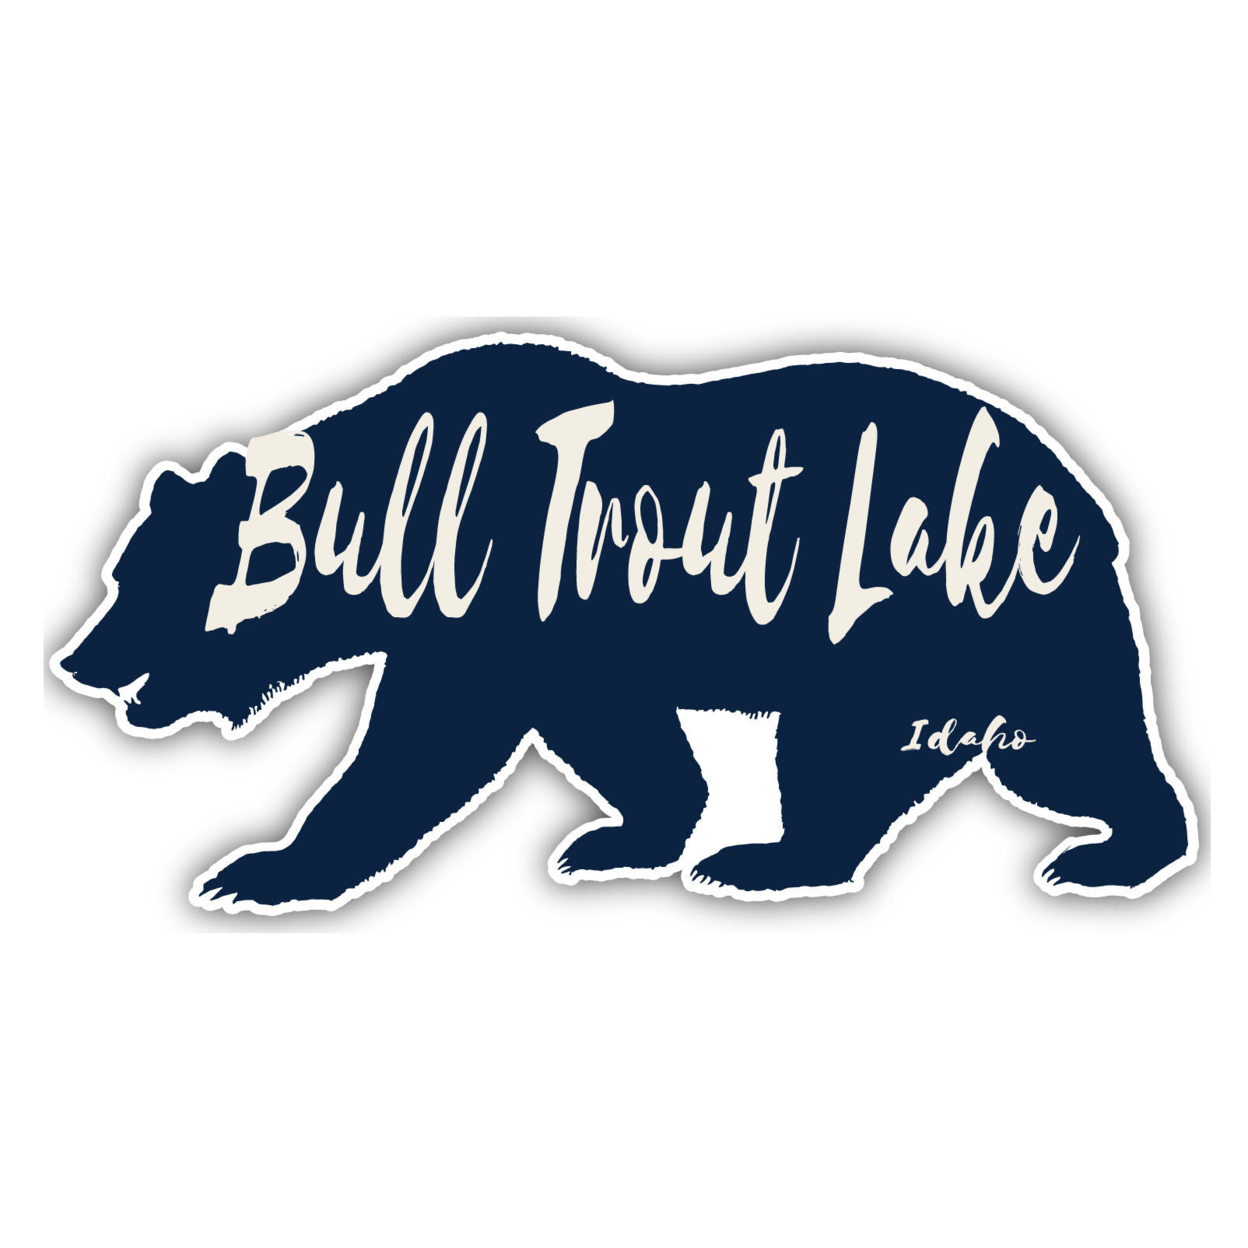 Bull Trout Lake Idaho Souvenir Decorative Stickers (Choose Theme And Size) - 4-Pack, 4-Inch, Bear